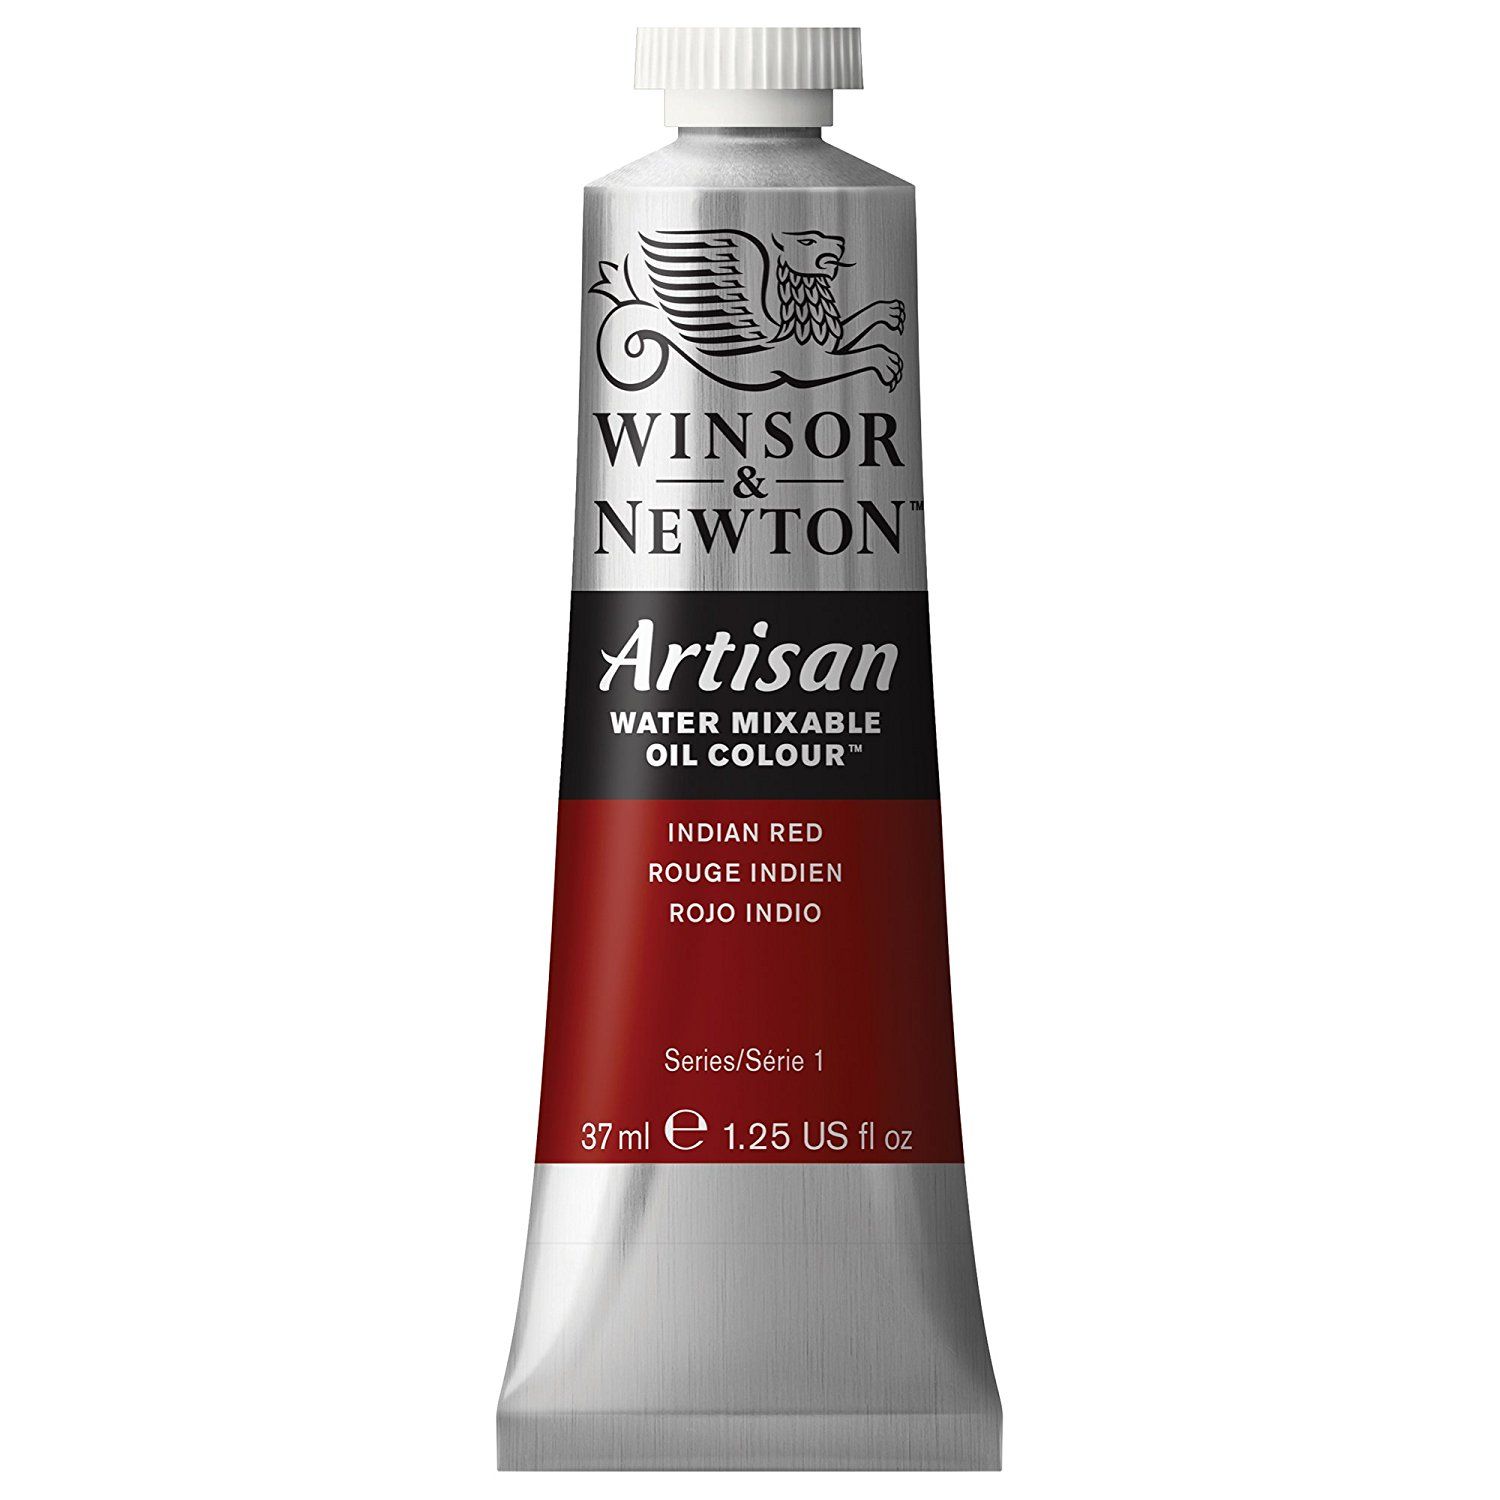 Artisan Water Mixable Oil - Indian Red 37ml